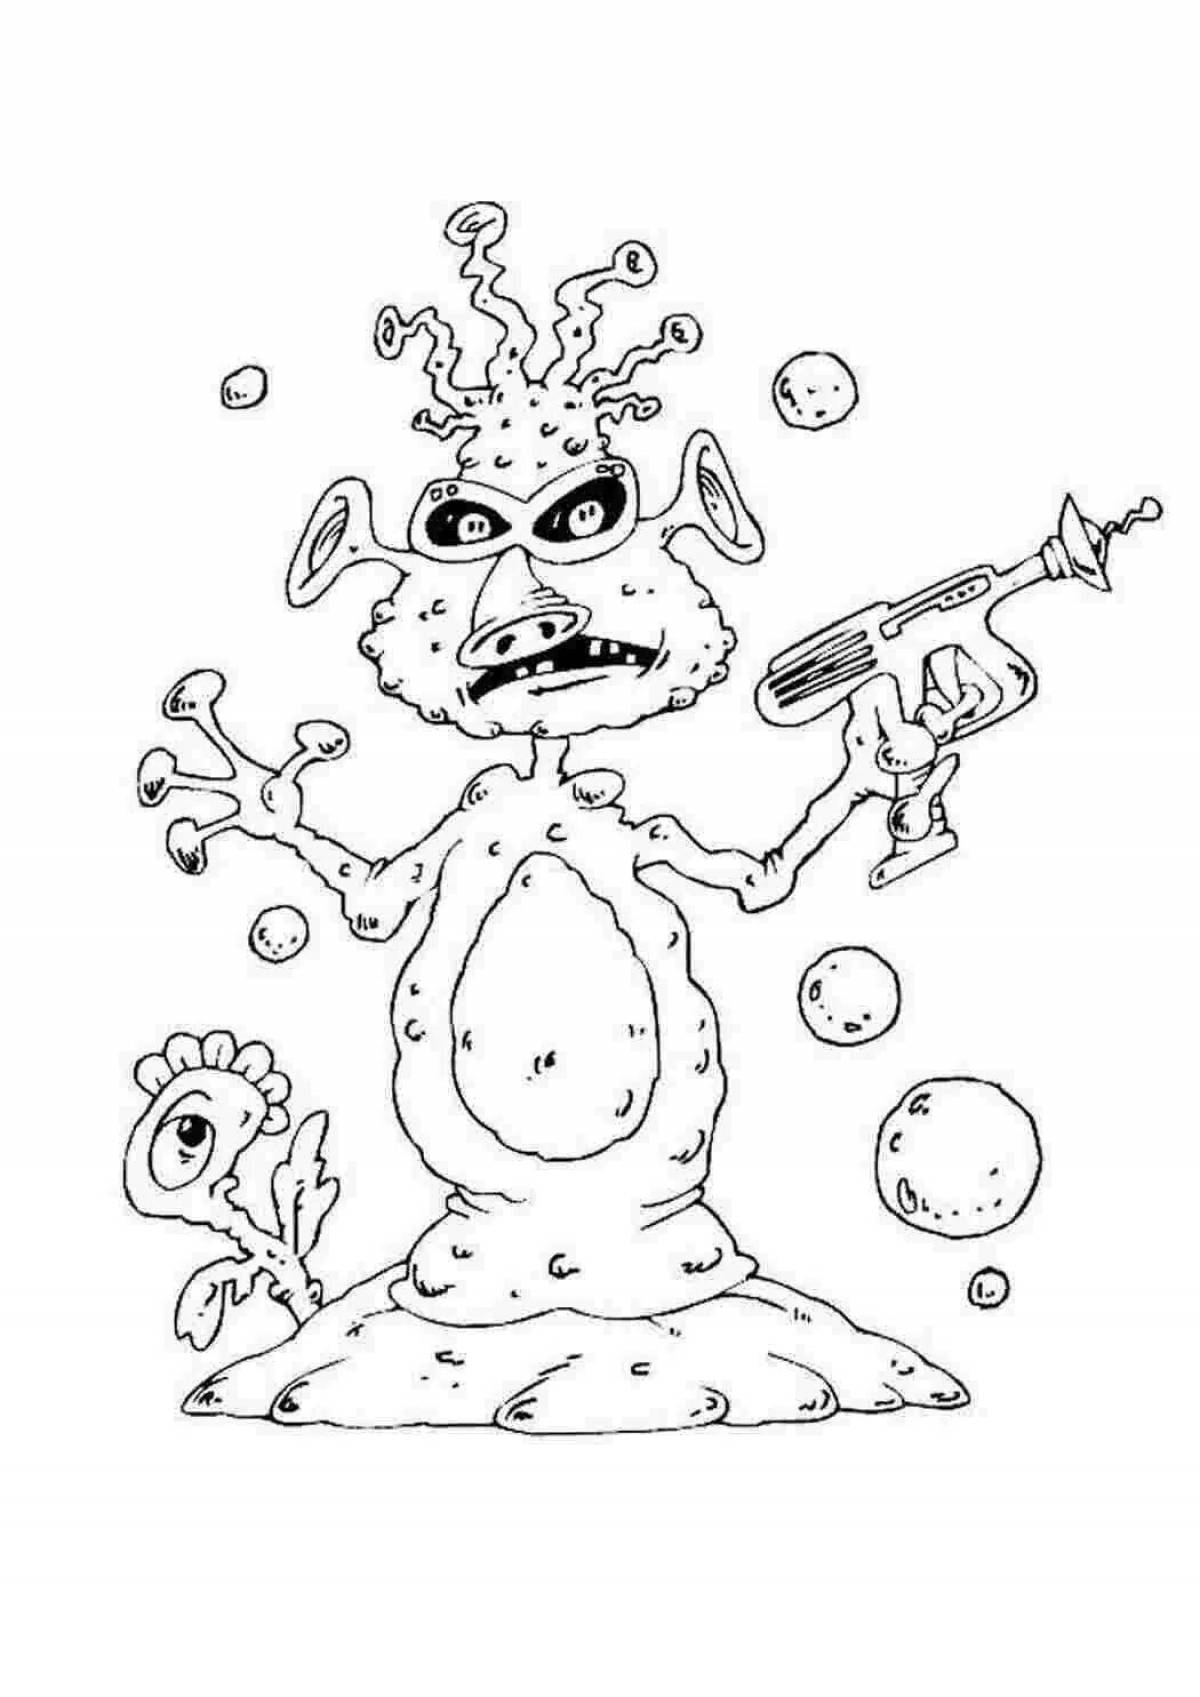 Fancy alien coloring pages for kids